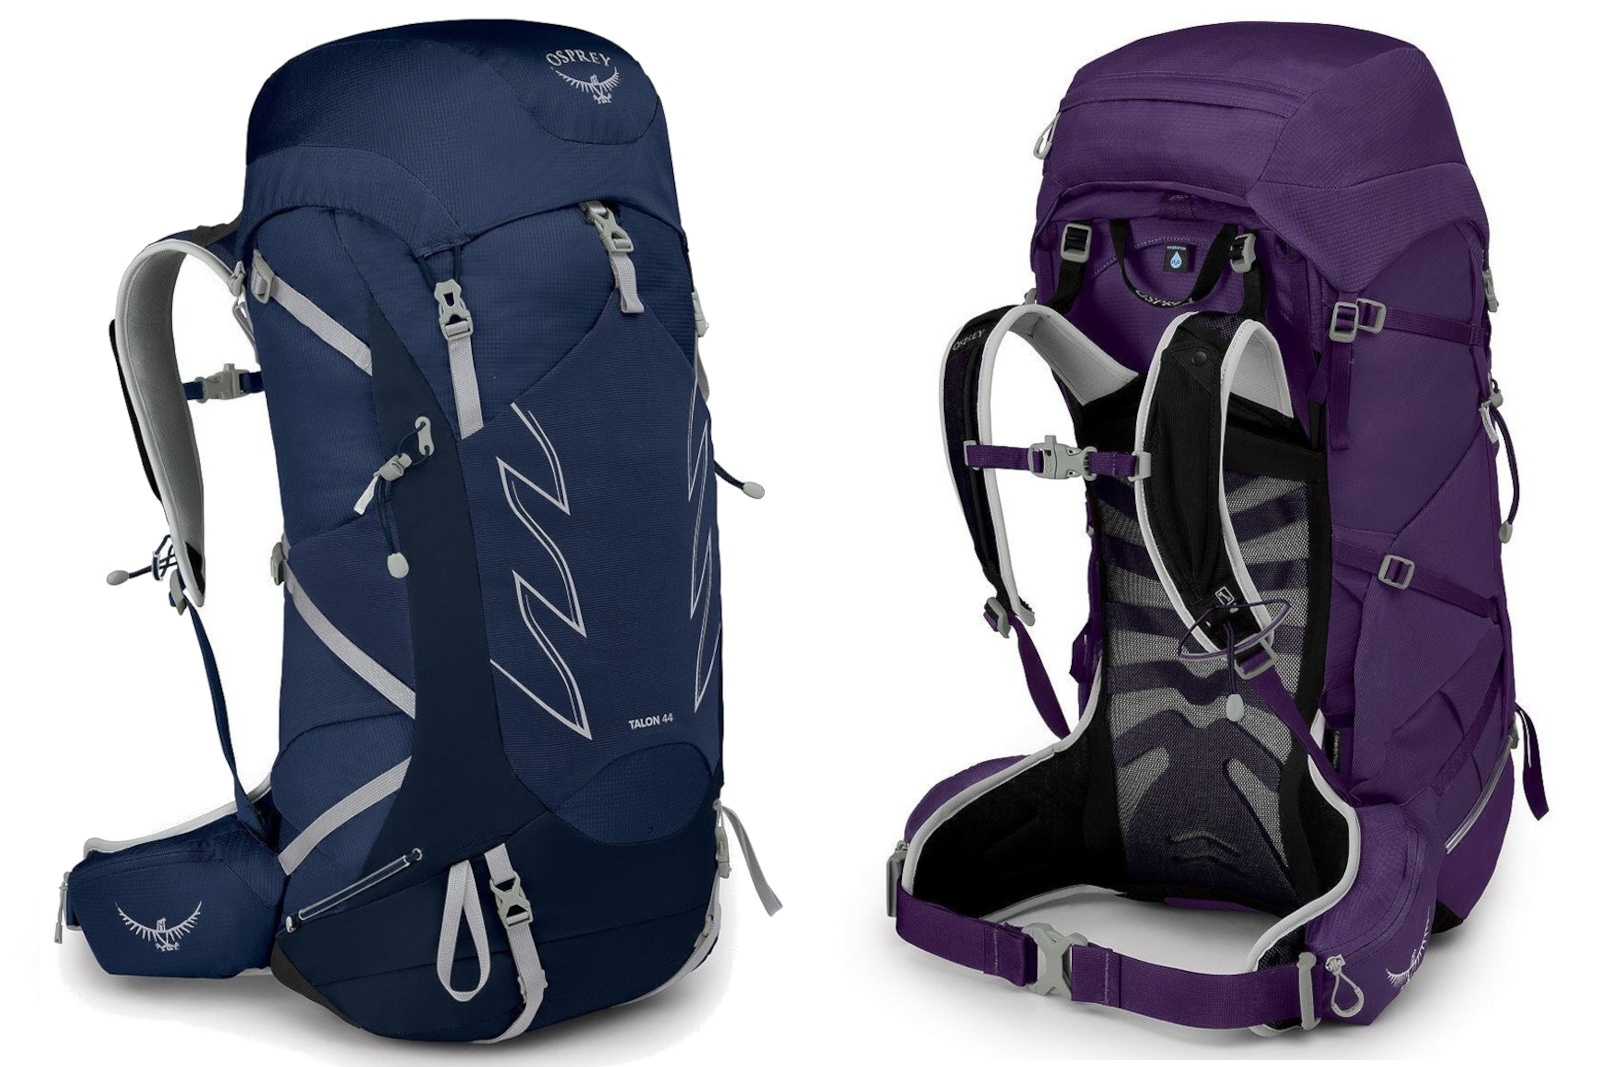 <p>Osprey designed the Talon 44 and Tempest 40 with multiday adventures and travelers in mind. The light packs sport an injection-molded AirScape backpanel with a continuous-wrap harness and hipbelt that move the pack with your body when hiking rough terrain.</p> <p>While streamlined, the pack has plenty of features. There’s a top-loading main compartment, a dedicated sleeping bag compartment, a hydration reservoir sleeve, dual-zippered hip pockets, and attachment points for ice axes and trekking poles. It’s made from heavy-duty nylon and a PFC-free DWR coating that meets Bluesign standards.</p> <a class="buy-now single" href="https://osprey.pxf.io/c/381569/1765694/20745?subId1=gjsposprey4thq224&u=https%3A%2F%2Fwww.osprey.com%2Ftalon-44-talon44s21-263%3Fcolor%3DCeramic%252520Blue">Shop Talon 44</a> <a class="buy-now single" href="https://osprey.pxf.io/c/381569/1765694/20745?subId1=gjsposprey4thq224&u=https%3A%2F%2Fwww.osprey.com%2Ftempest-40-tempest40s21-265%3Fcolor%3DViolac%252520Purple">Shop Tempest 40</a>